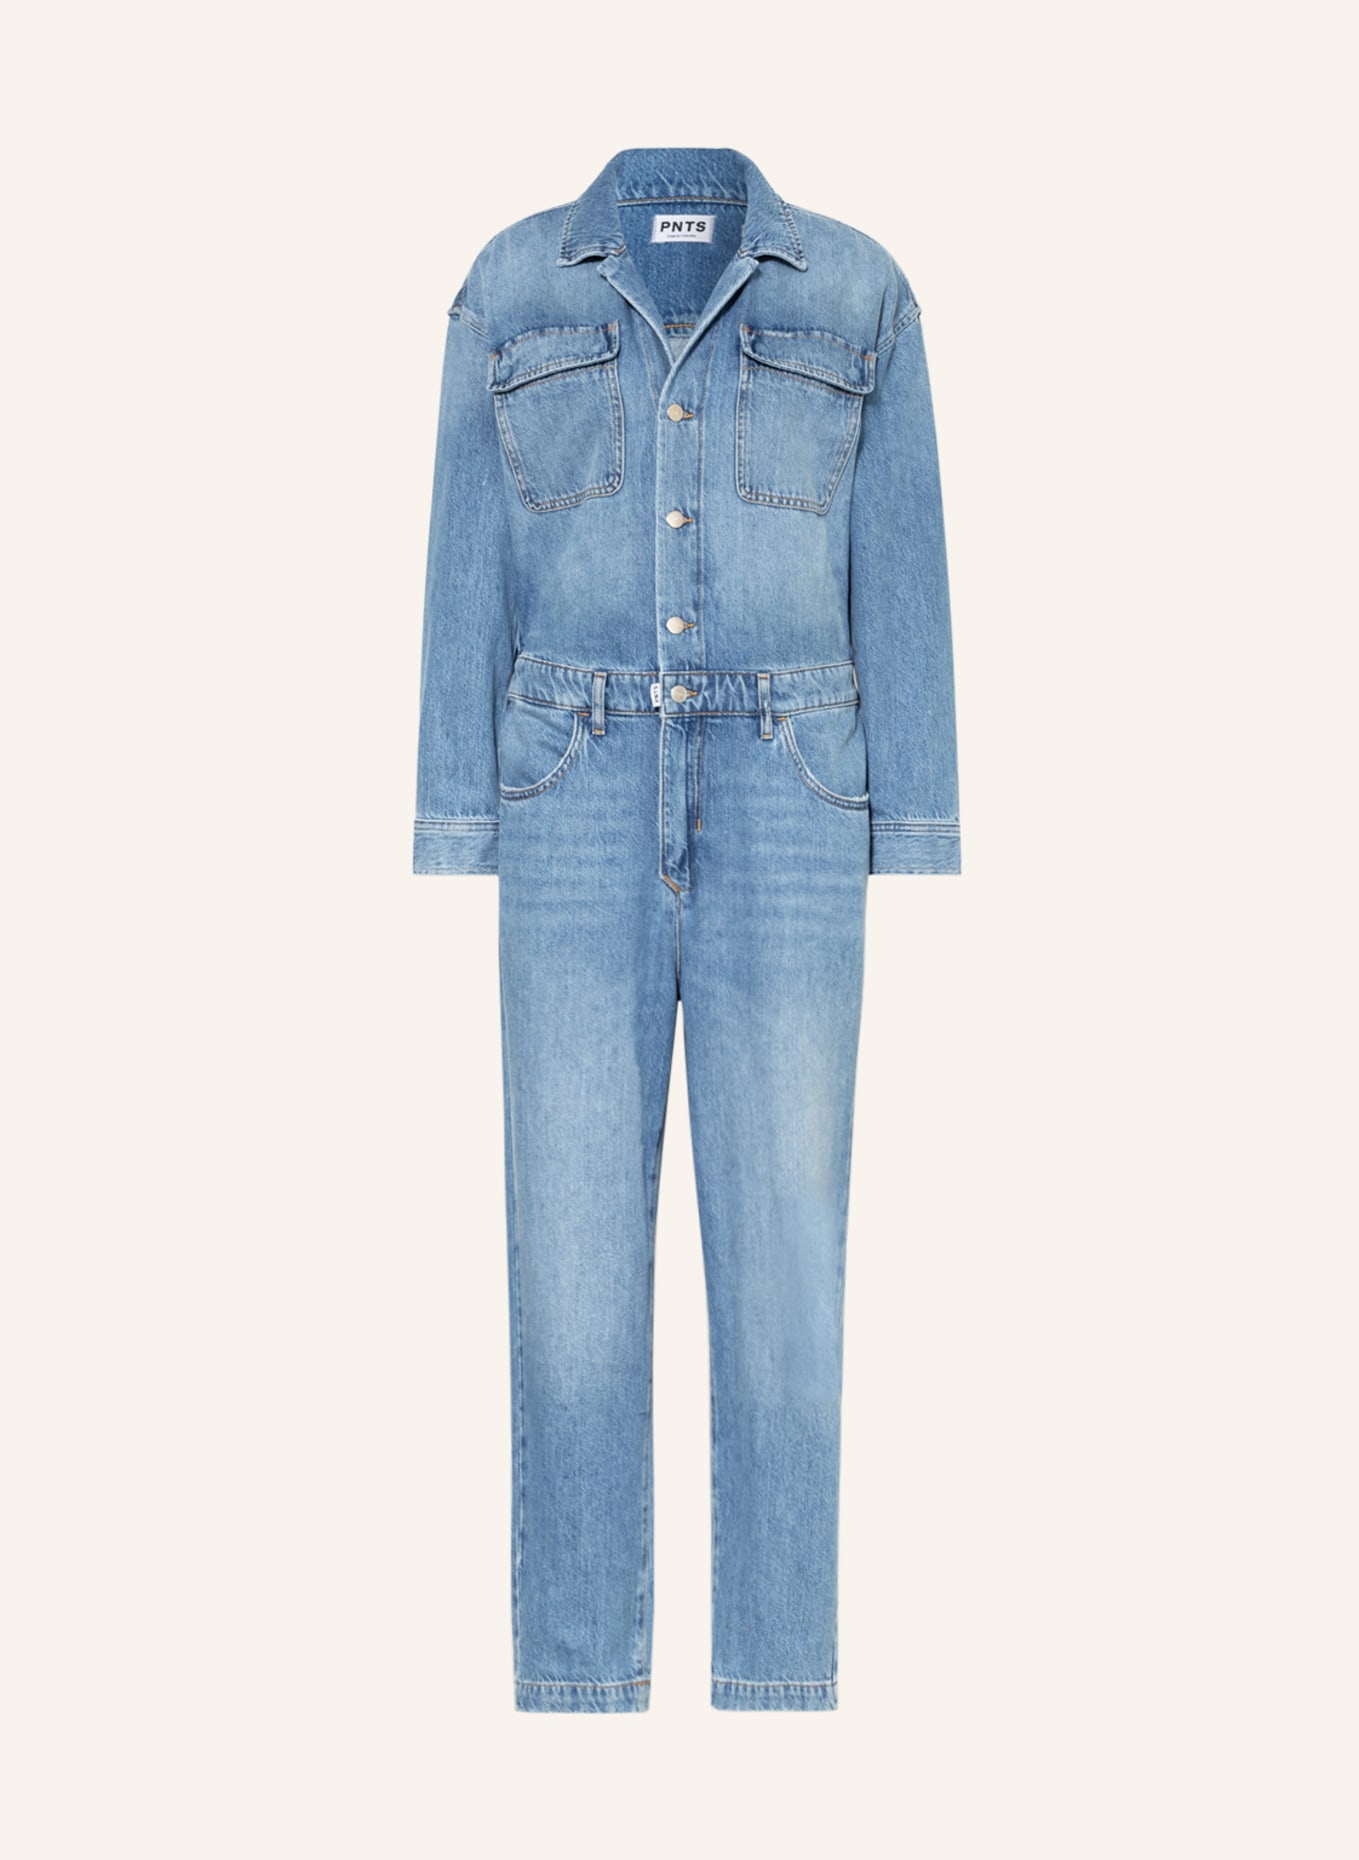 PNTS Jeans-Jumpsuit THE JUMP IN in 28 blue